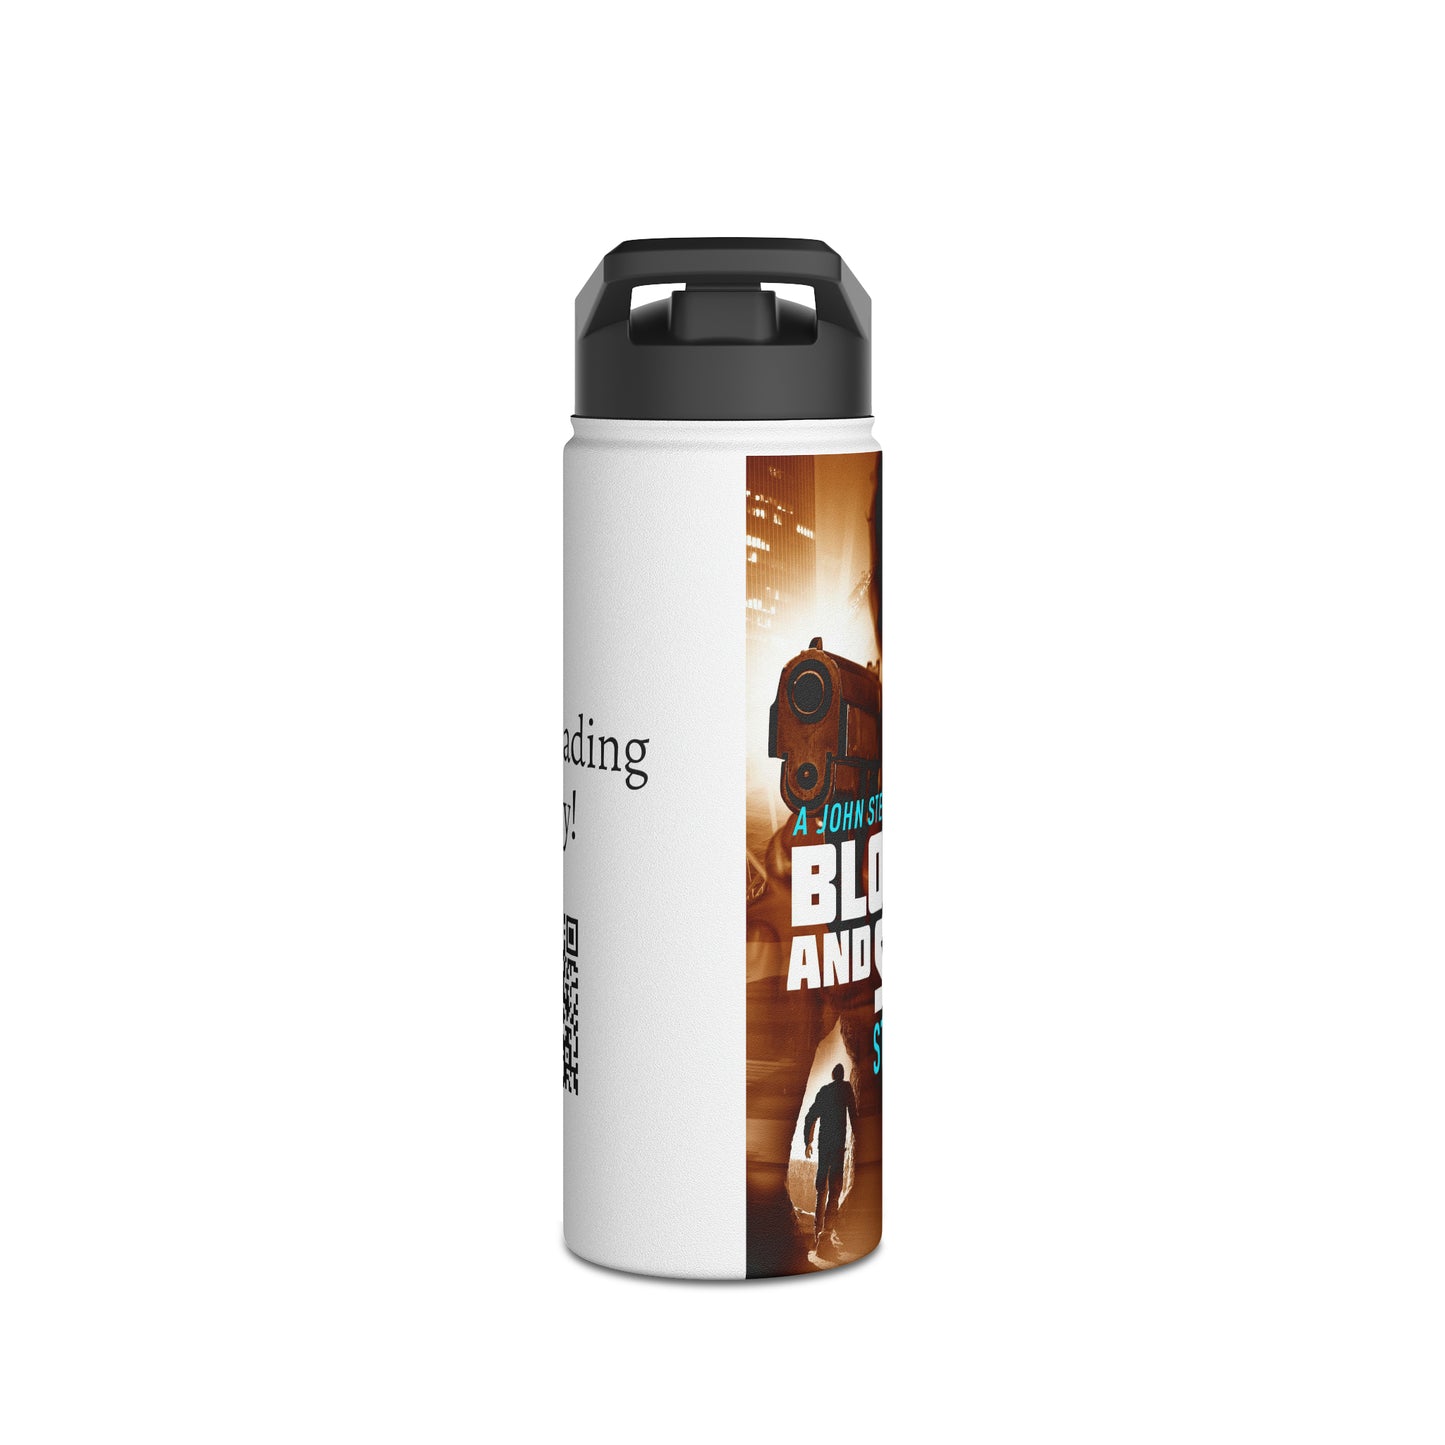 Blood And Steel - Stainless Steel Water Bottle